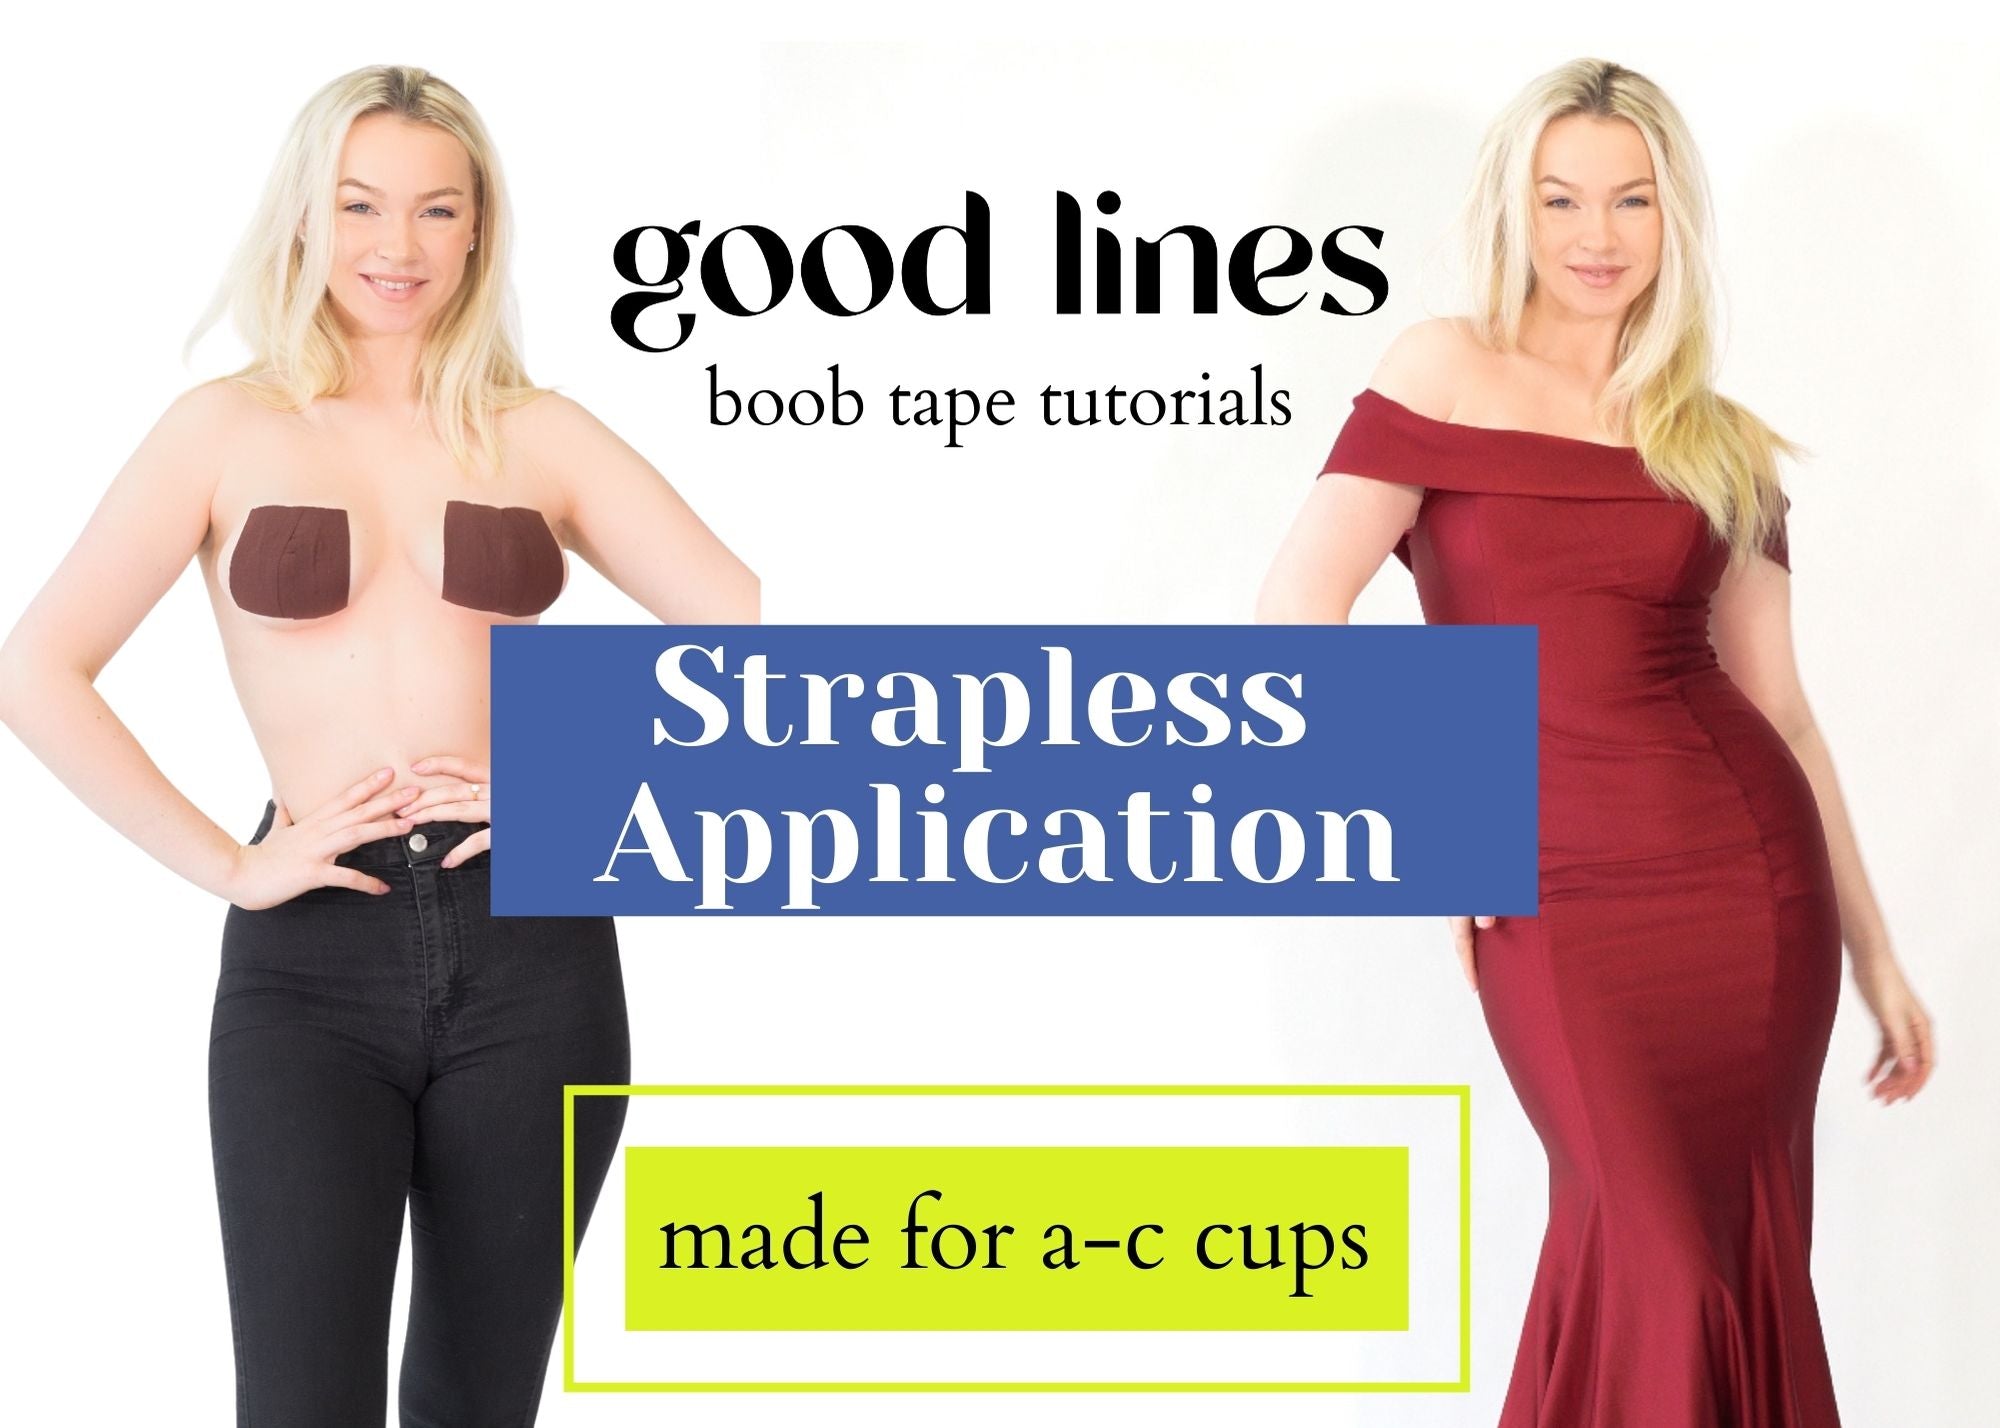 NEW VIDEOS: Toss your STRAPLESS bras out ASAP – Good Lines